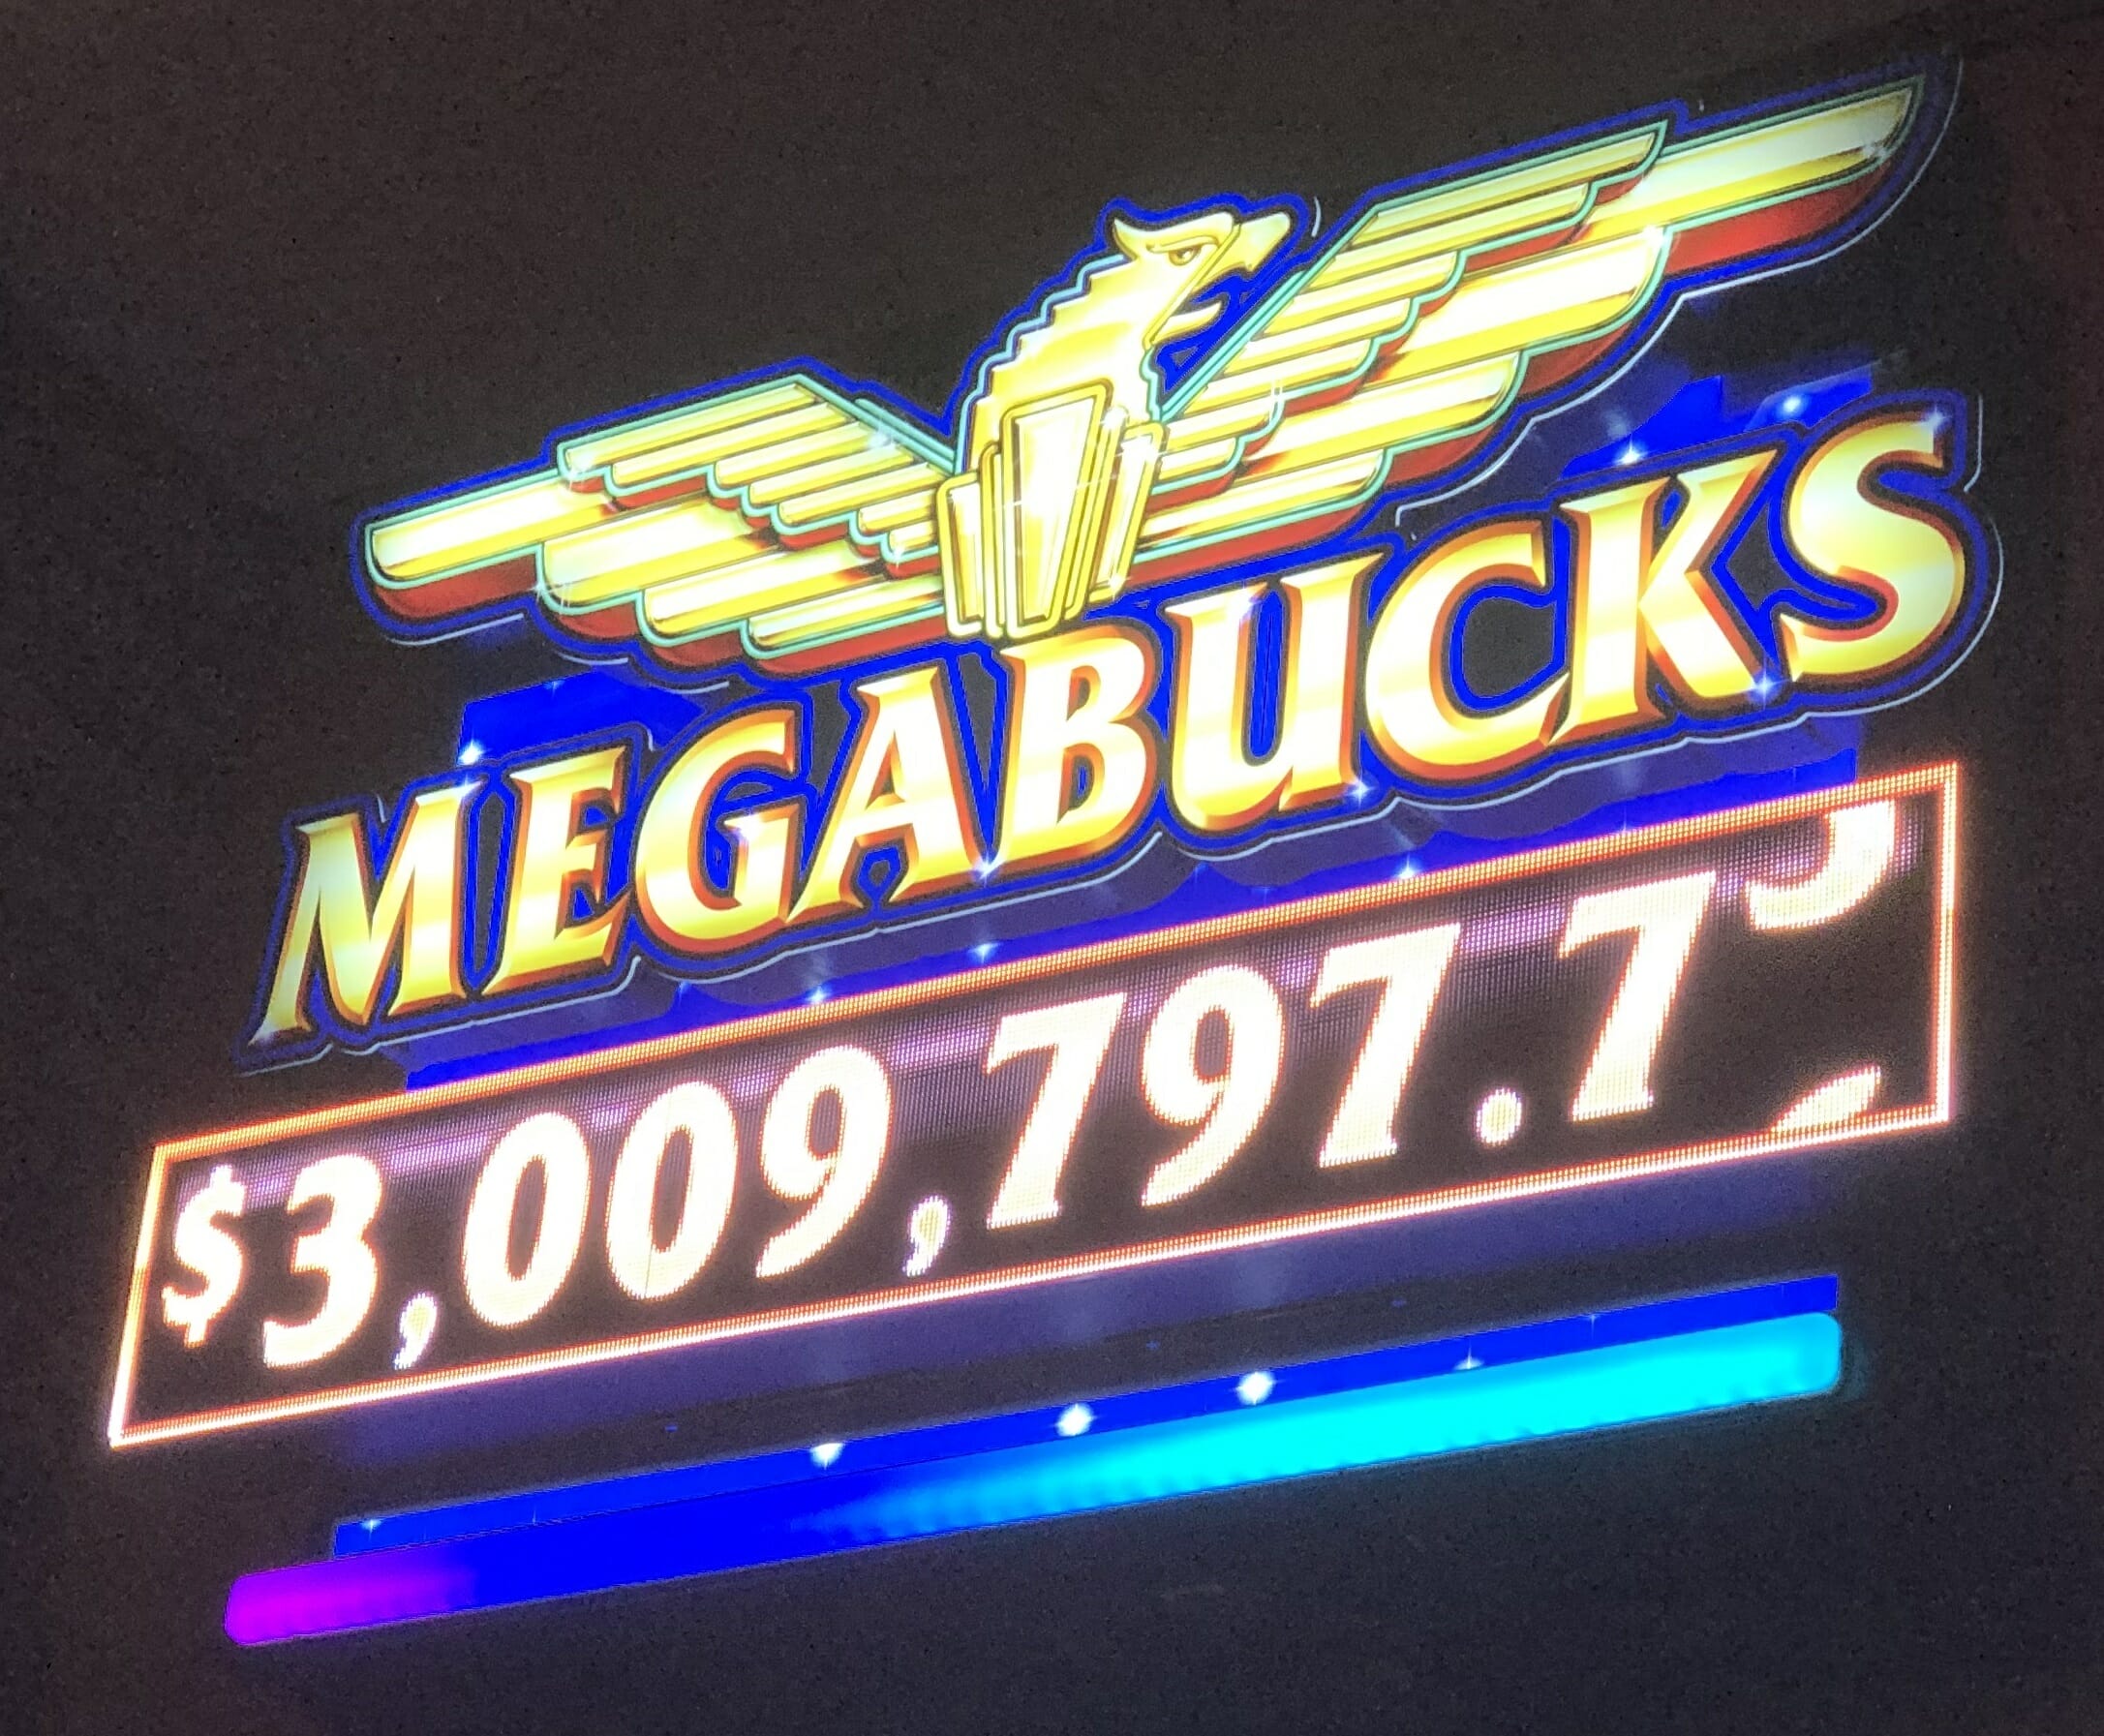 Do You Always Have to Max Bet on Megabucks Slots to be Jackpot Eligible